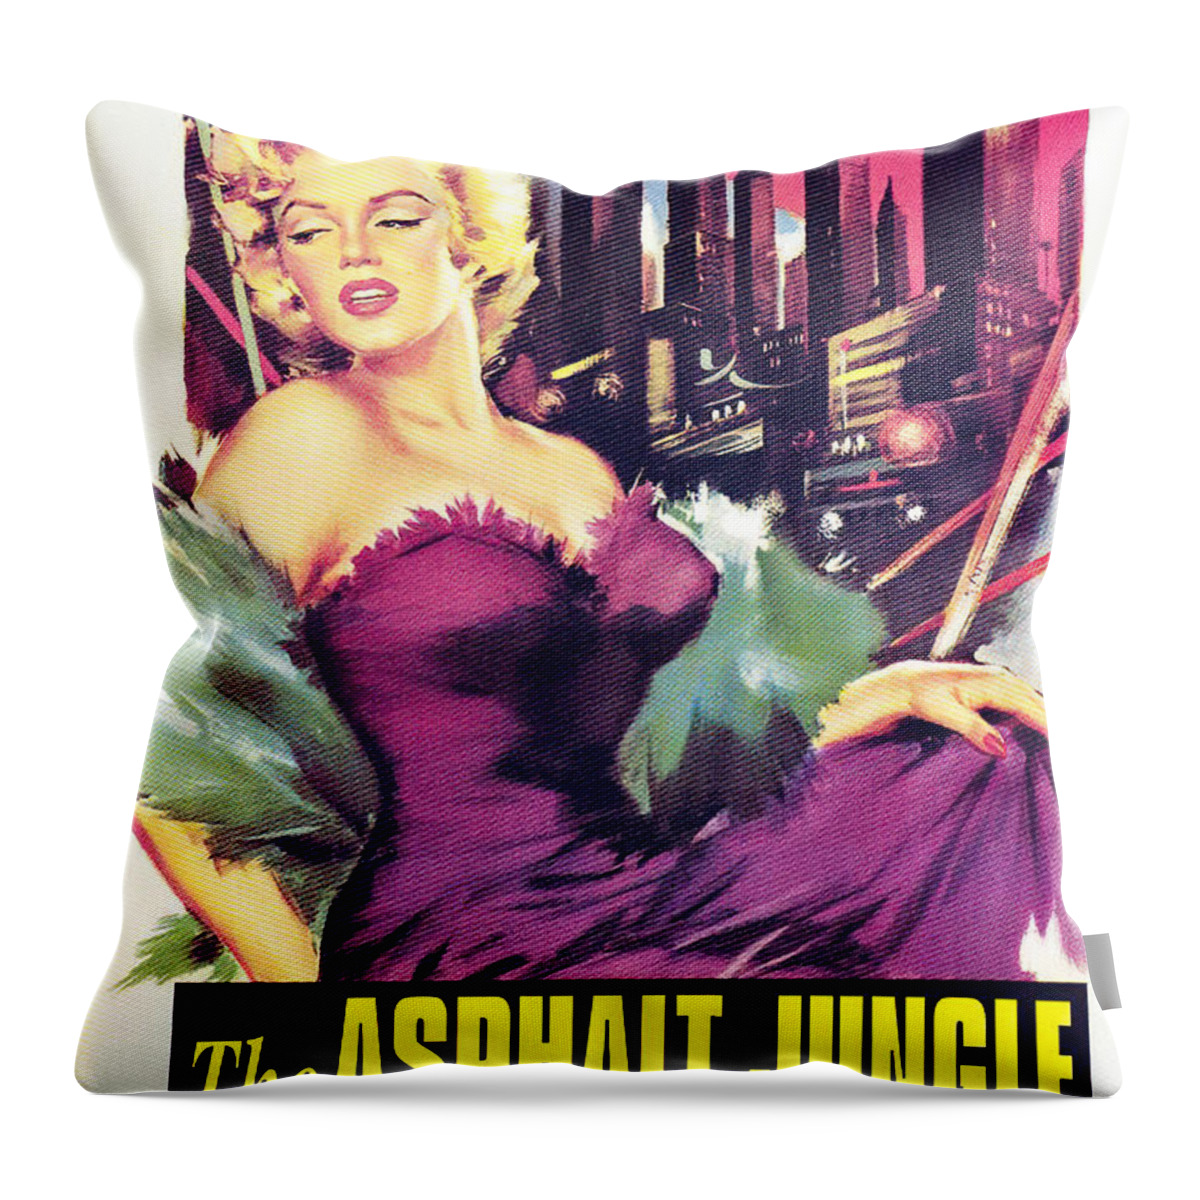 Angelo Throw Pillow featuring the mixed media ''The Asphalt Jungle'', 1950 - art by Angelo Cesselon by Movie World Posters